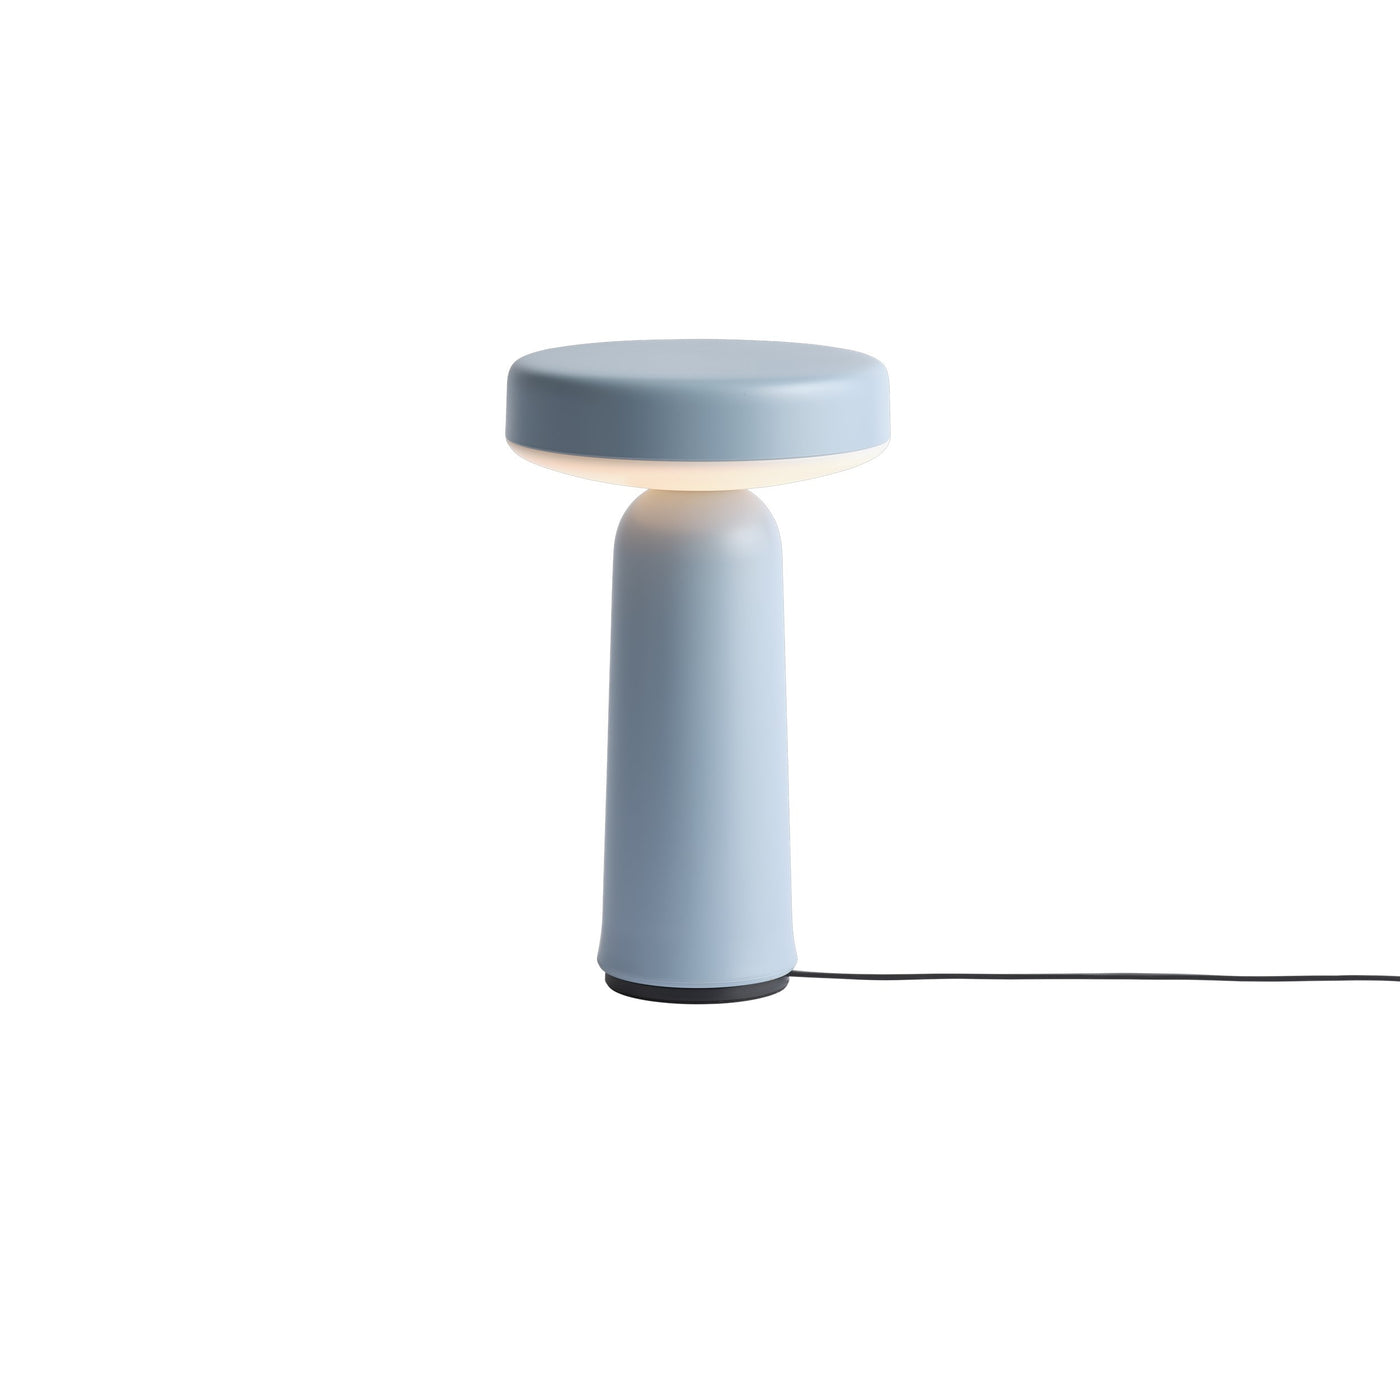 Muuto Ease Portable Lamp. Free UK delivery at someday designs. #colour_light-blue